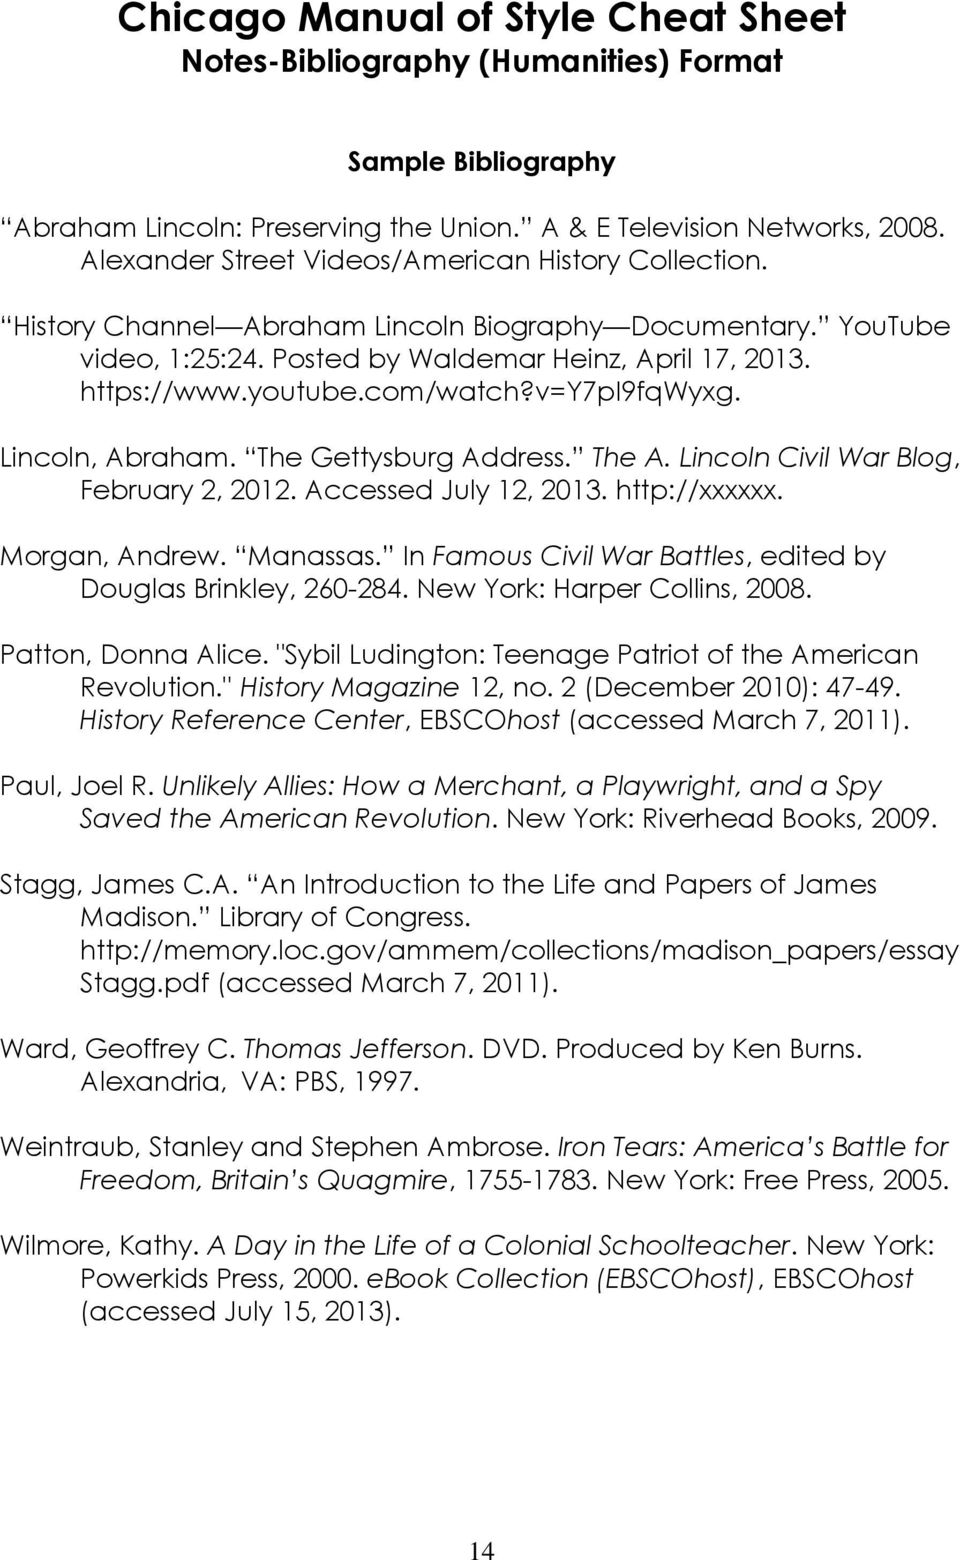 sample bibliography page chicago style